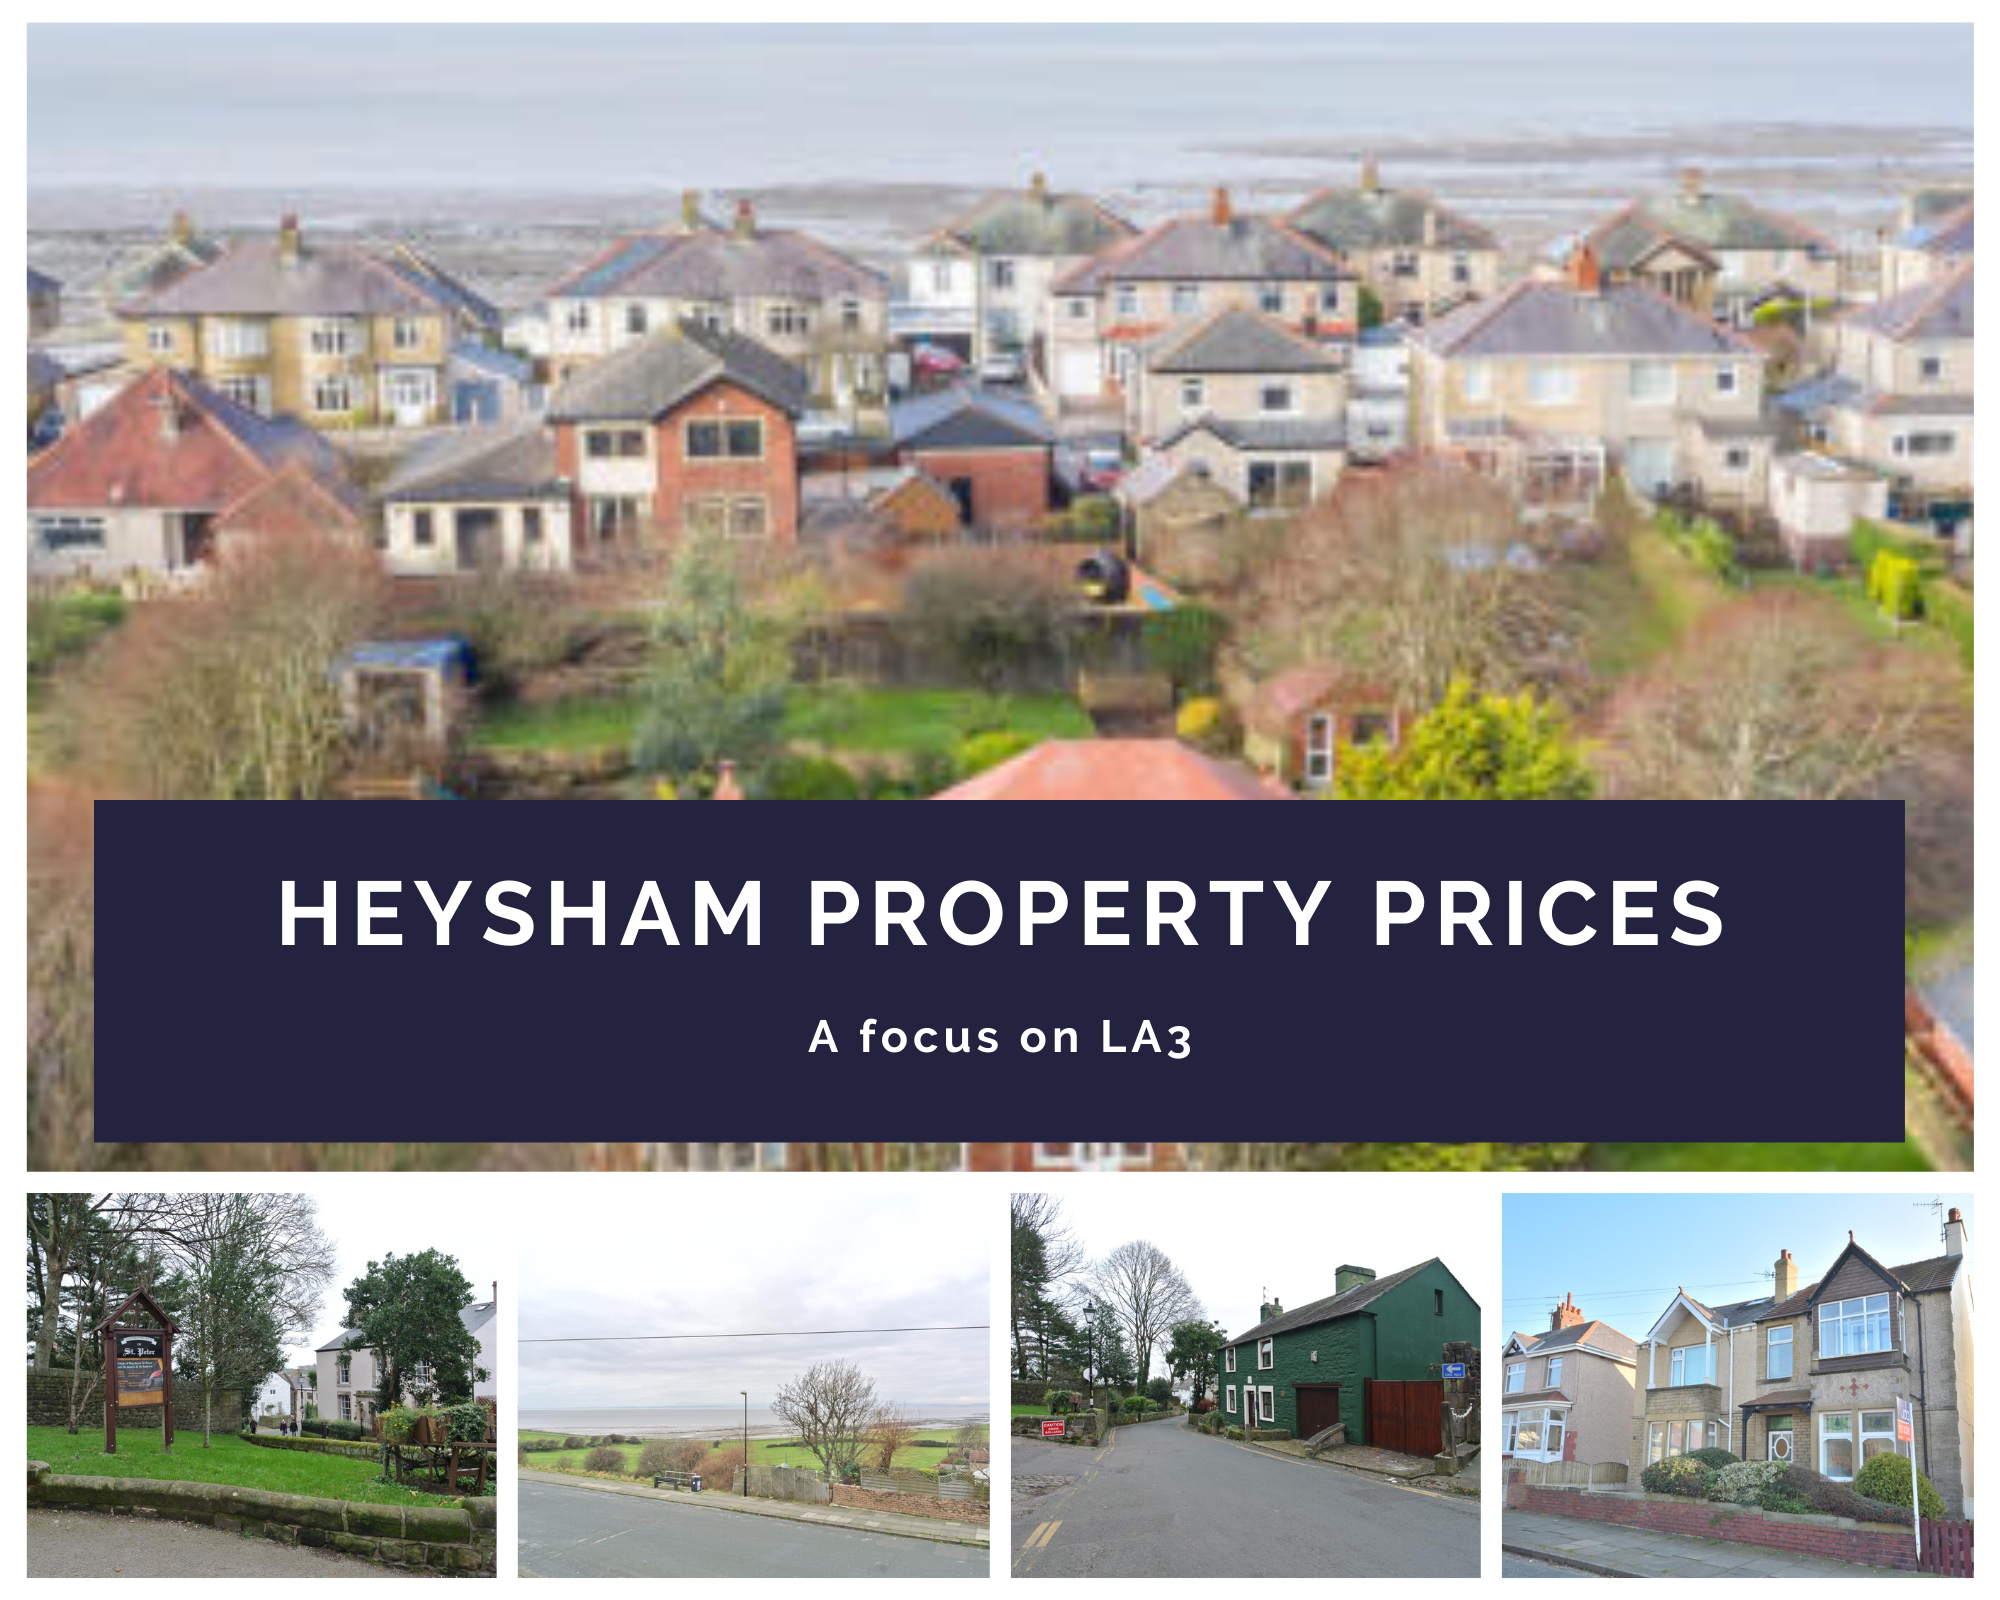 How have property prices changed in the Heysham Property Market?